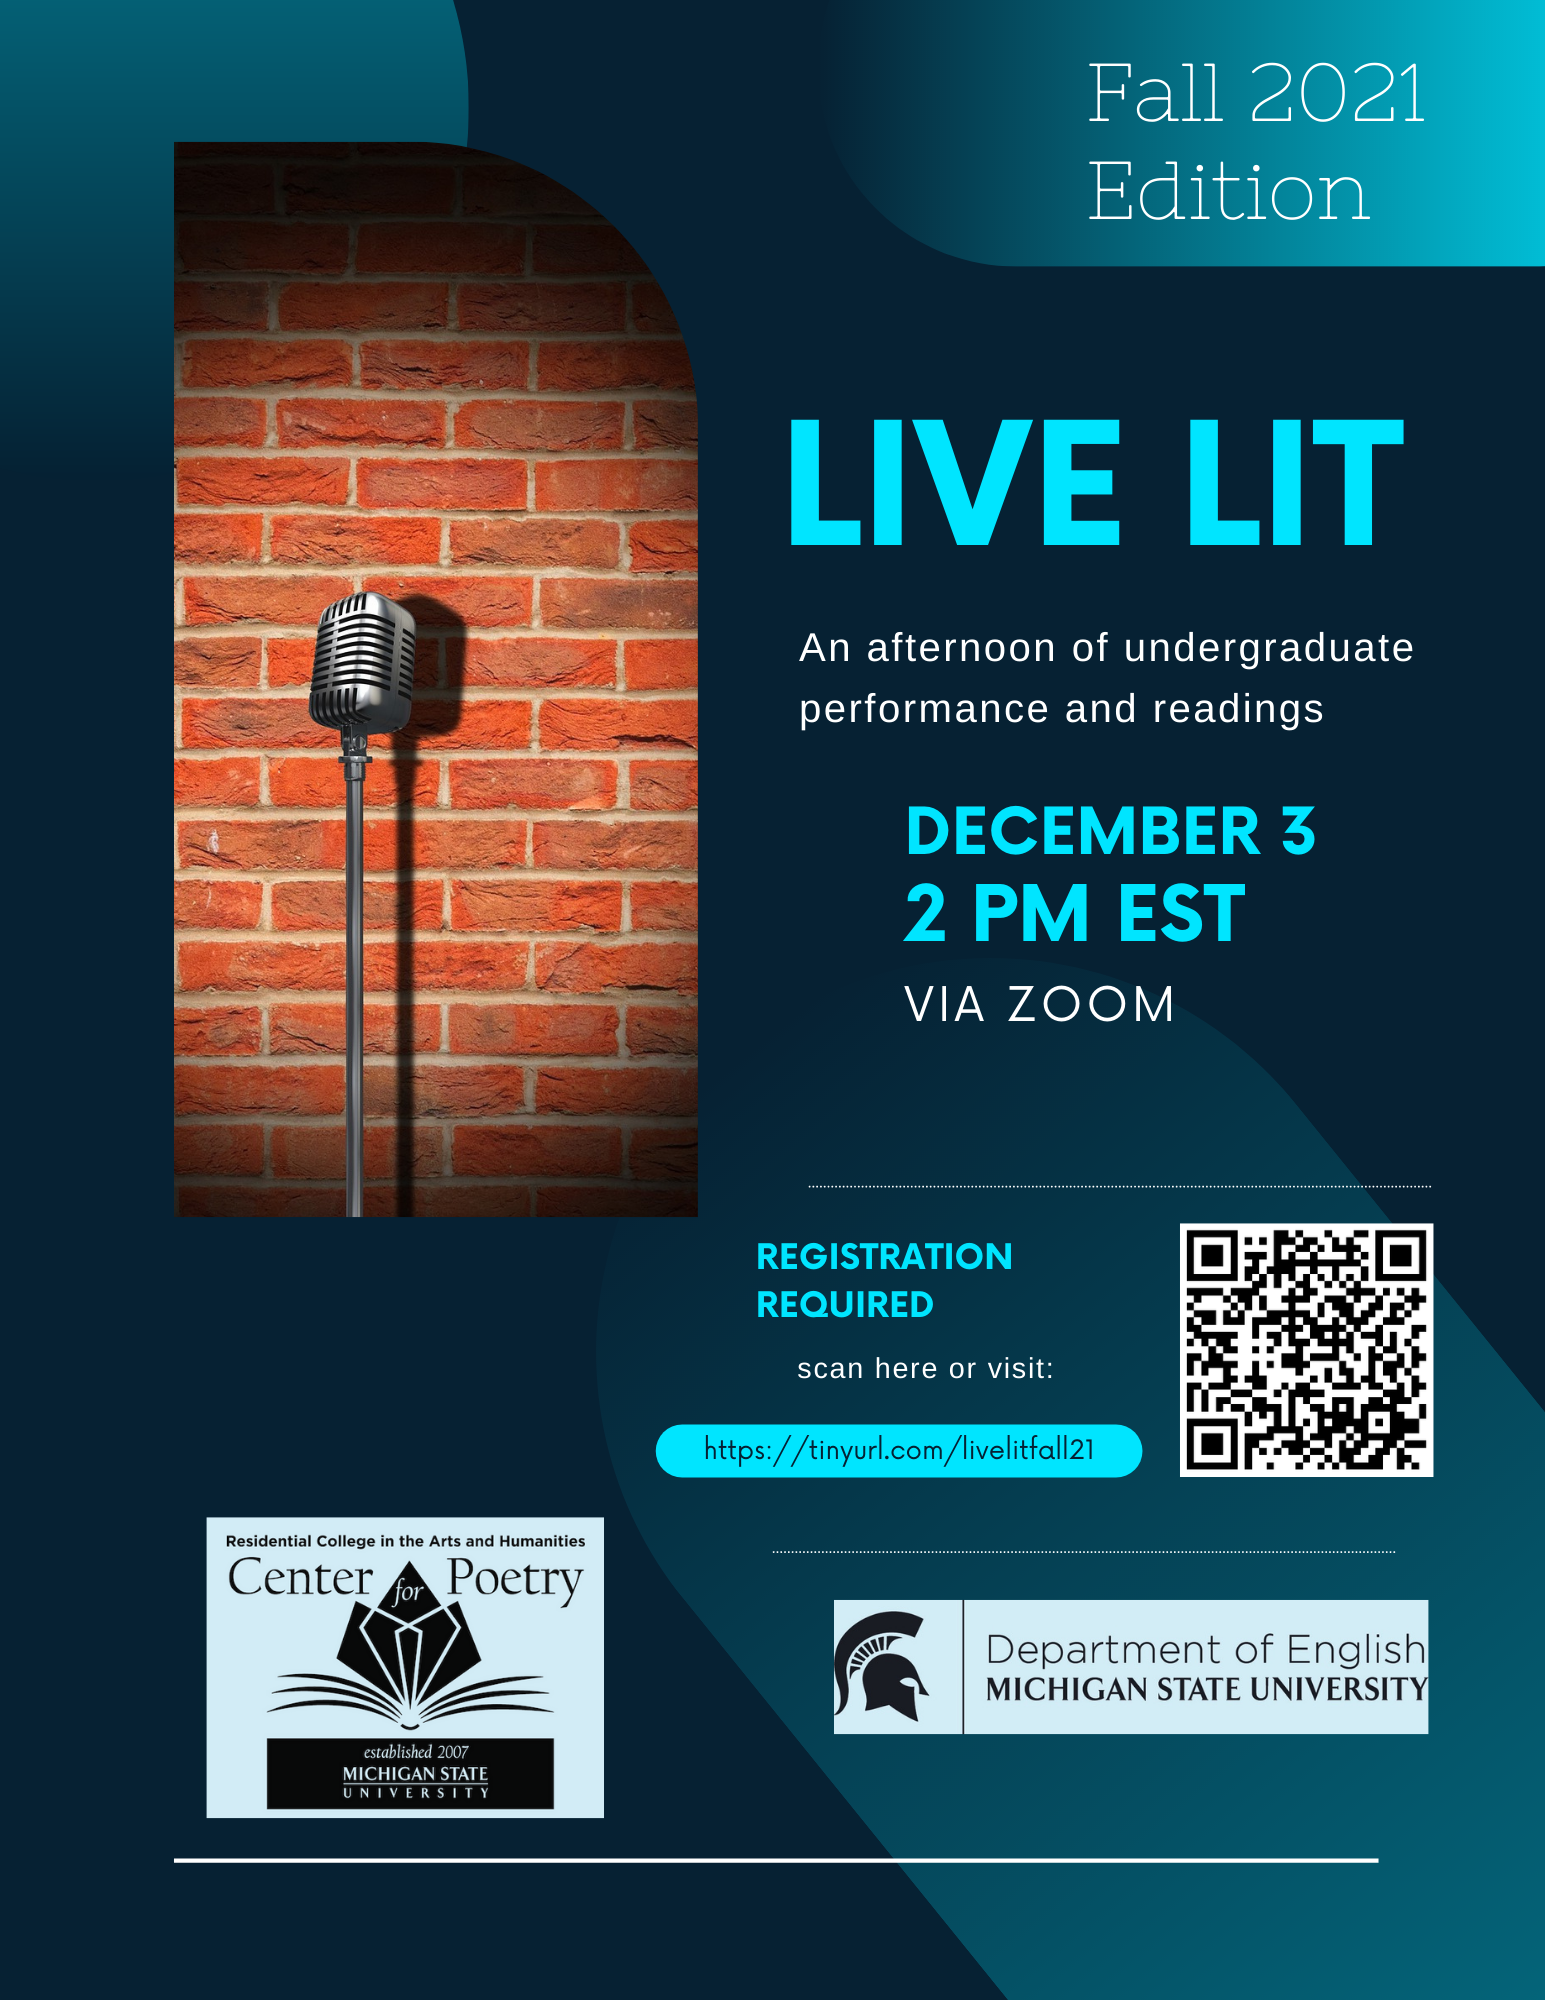 flyer with event info and image of vintage mic against brick background